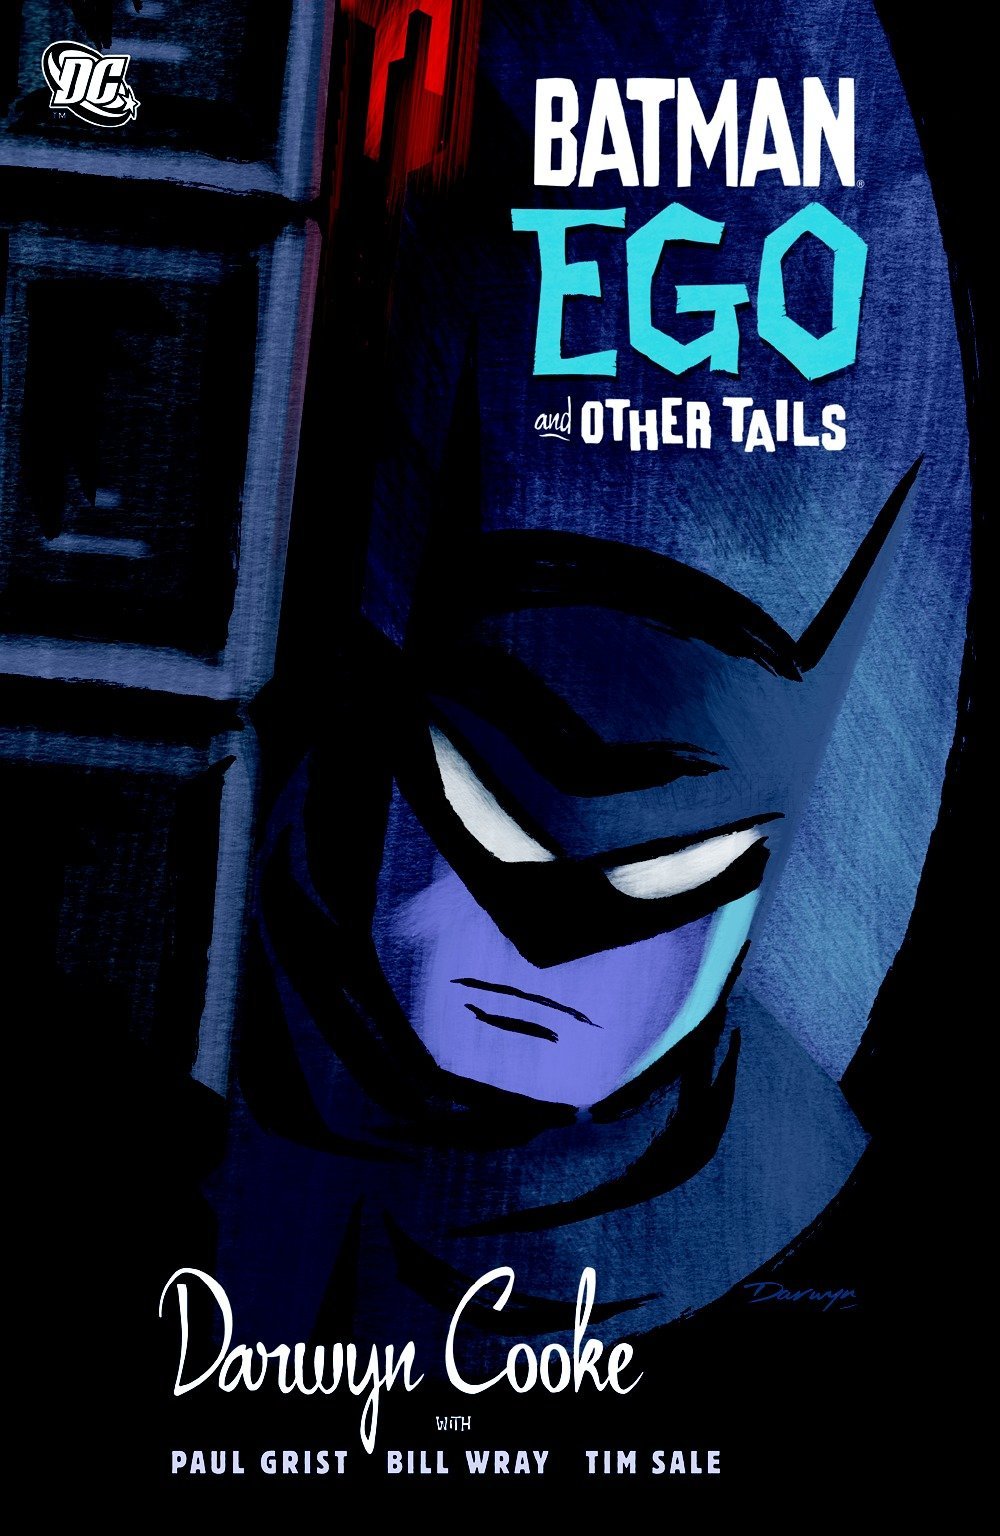 BATMAN EGO AND OTHER TAILS TRADE PAPERBACK